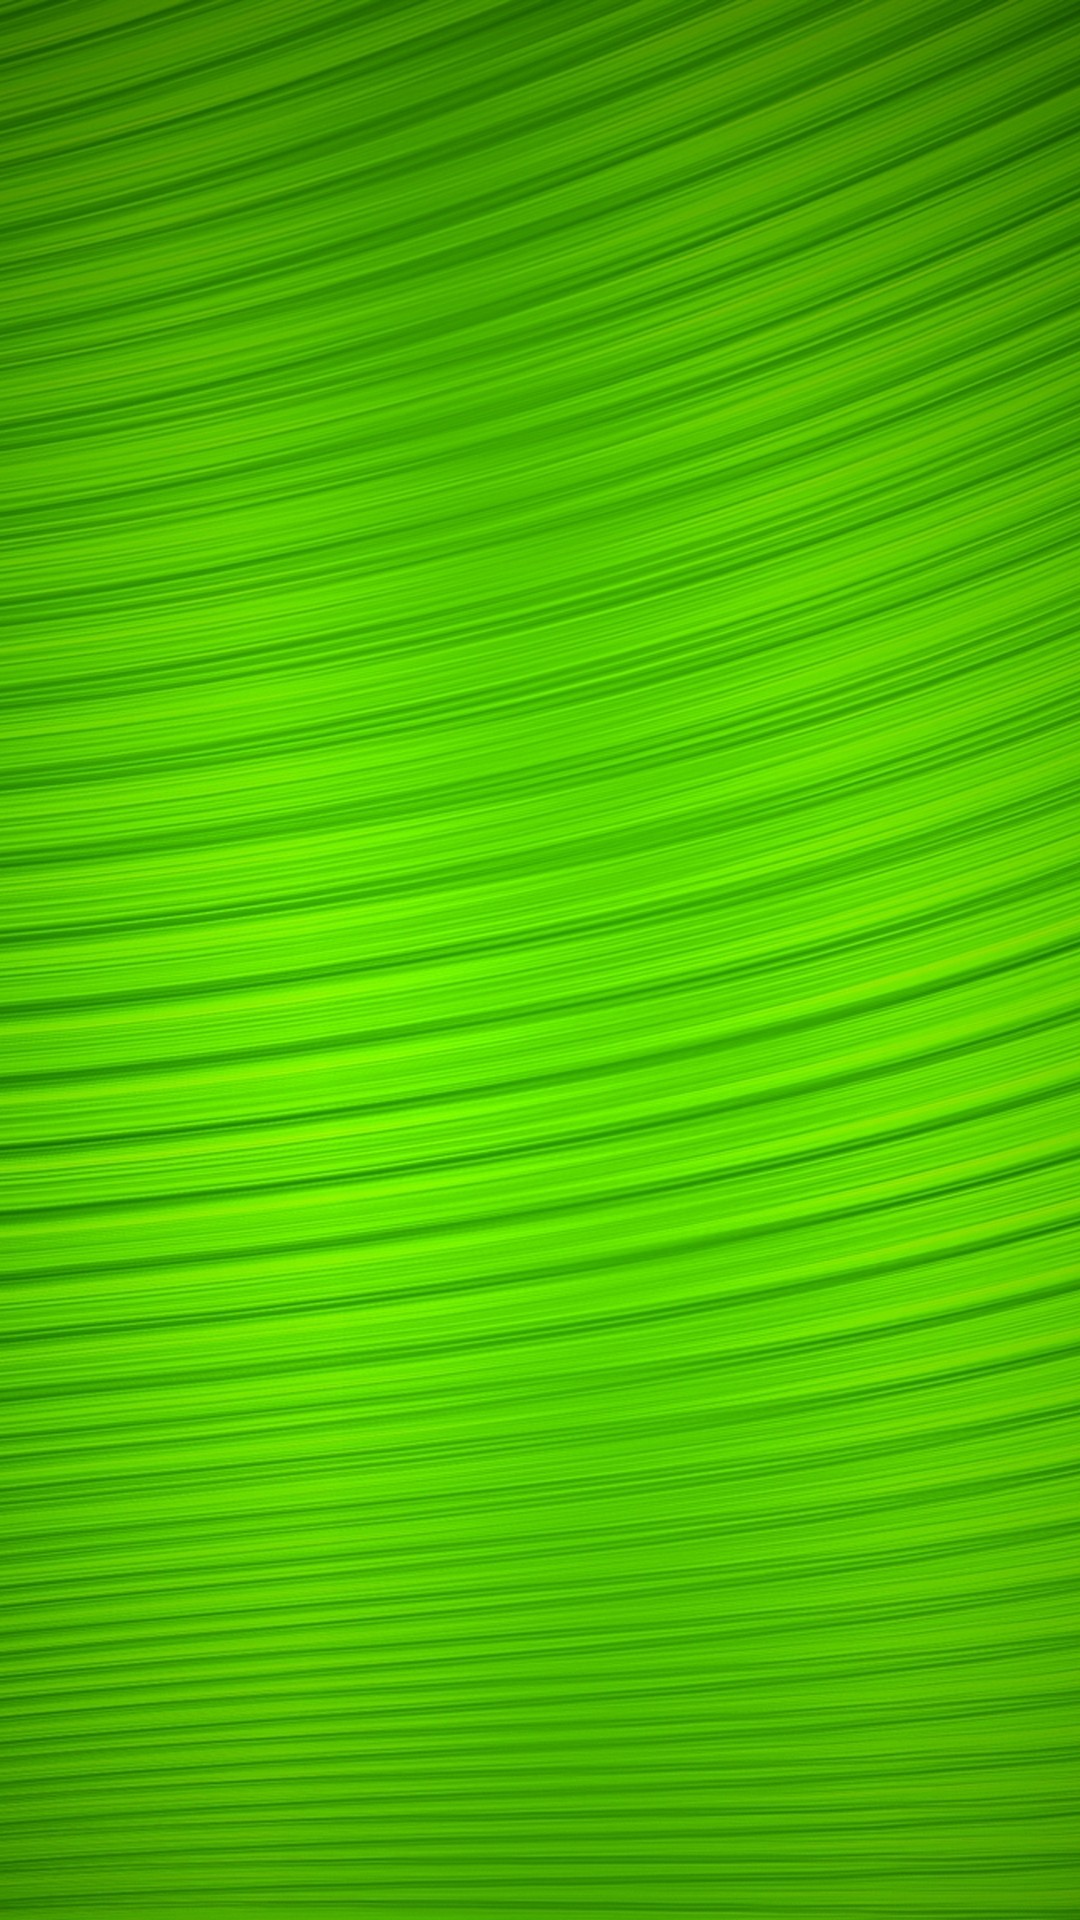 Wallpaper Neon Green iPhone with resolution 1080X1920 pixel. You can make this wallpaper for your iPhone 5, 6, 7, 8, X backgrounds, Mobile Screensaver, or iPad Lock Screen